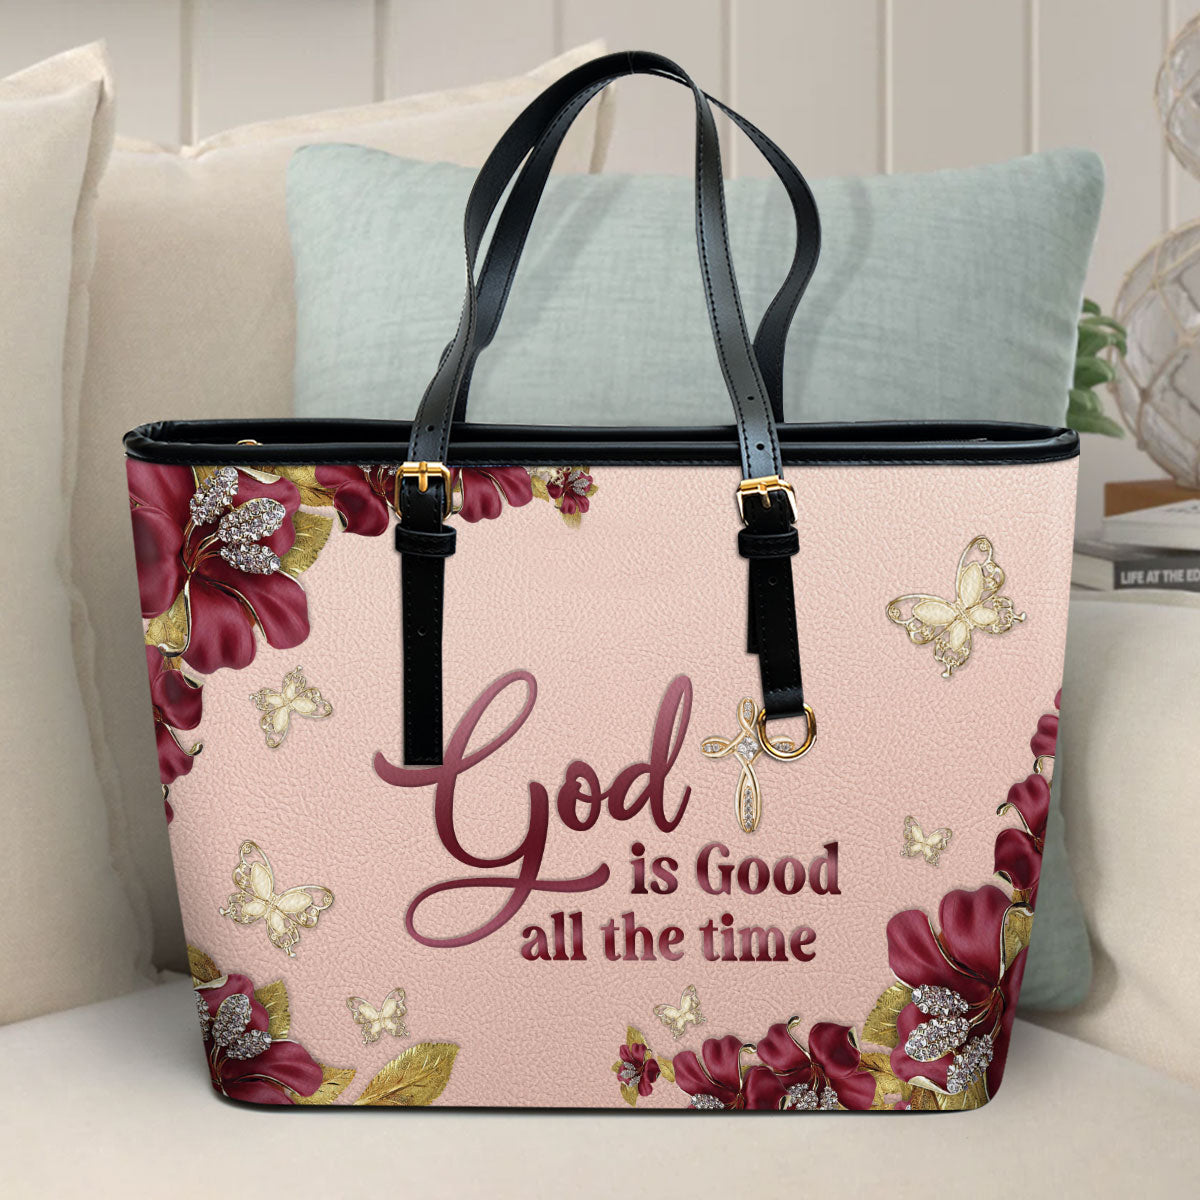 God Is Good All The Time Large Leather Tote Bag - Christ Gifts For Religious Women - Best Mother's Day Gifts